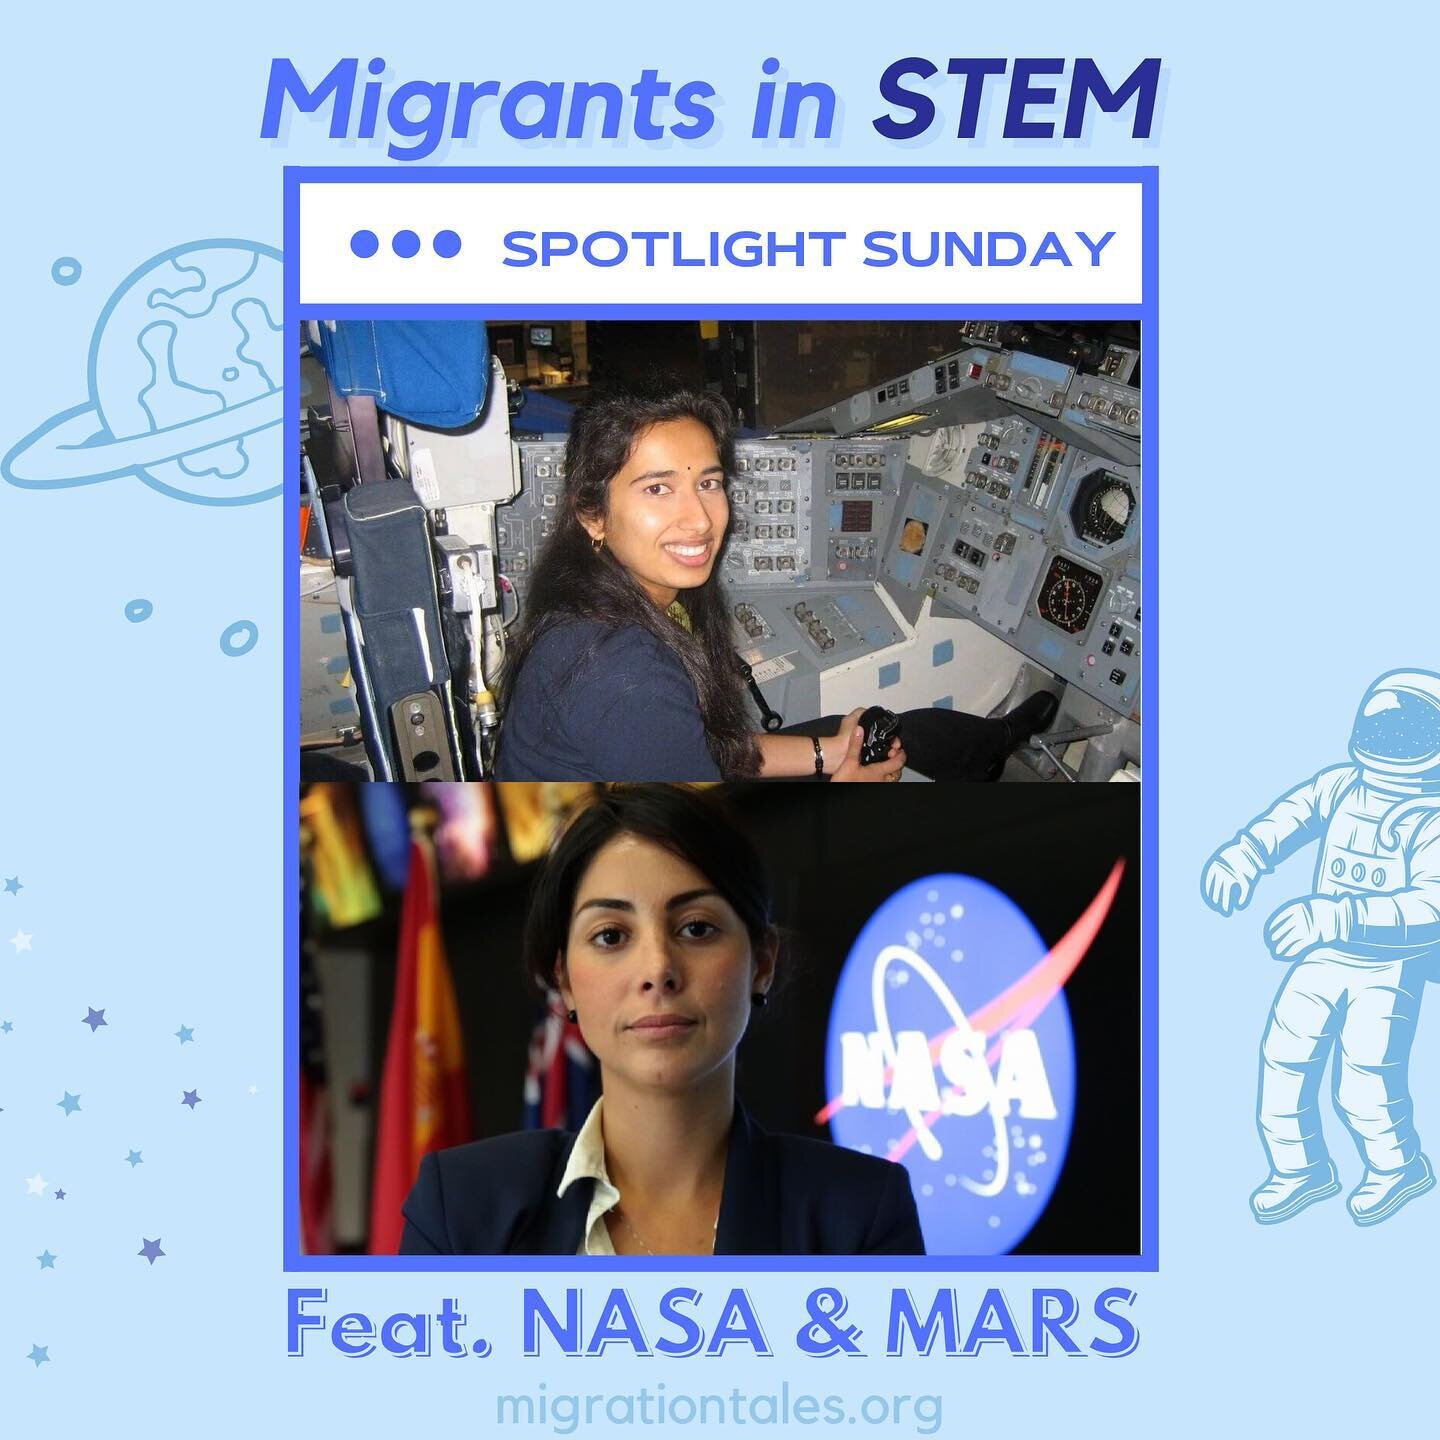 ✰ SPOTLIGHT SUNDAY✰ Space version!🚀
Every Sunday, we will be featuring 2-3 migrants for their brilliant contribution to global development. Stay tuned!
🔹This Week: Migrants in NASA🔹
- In light of the NASA Mars 2020 rover mission, people took the o